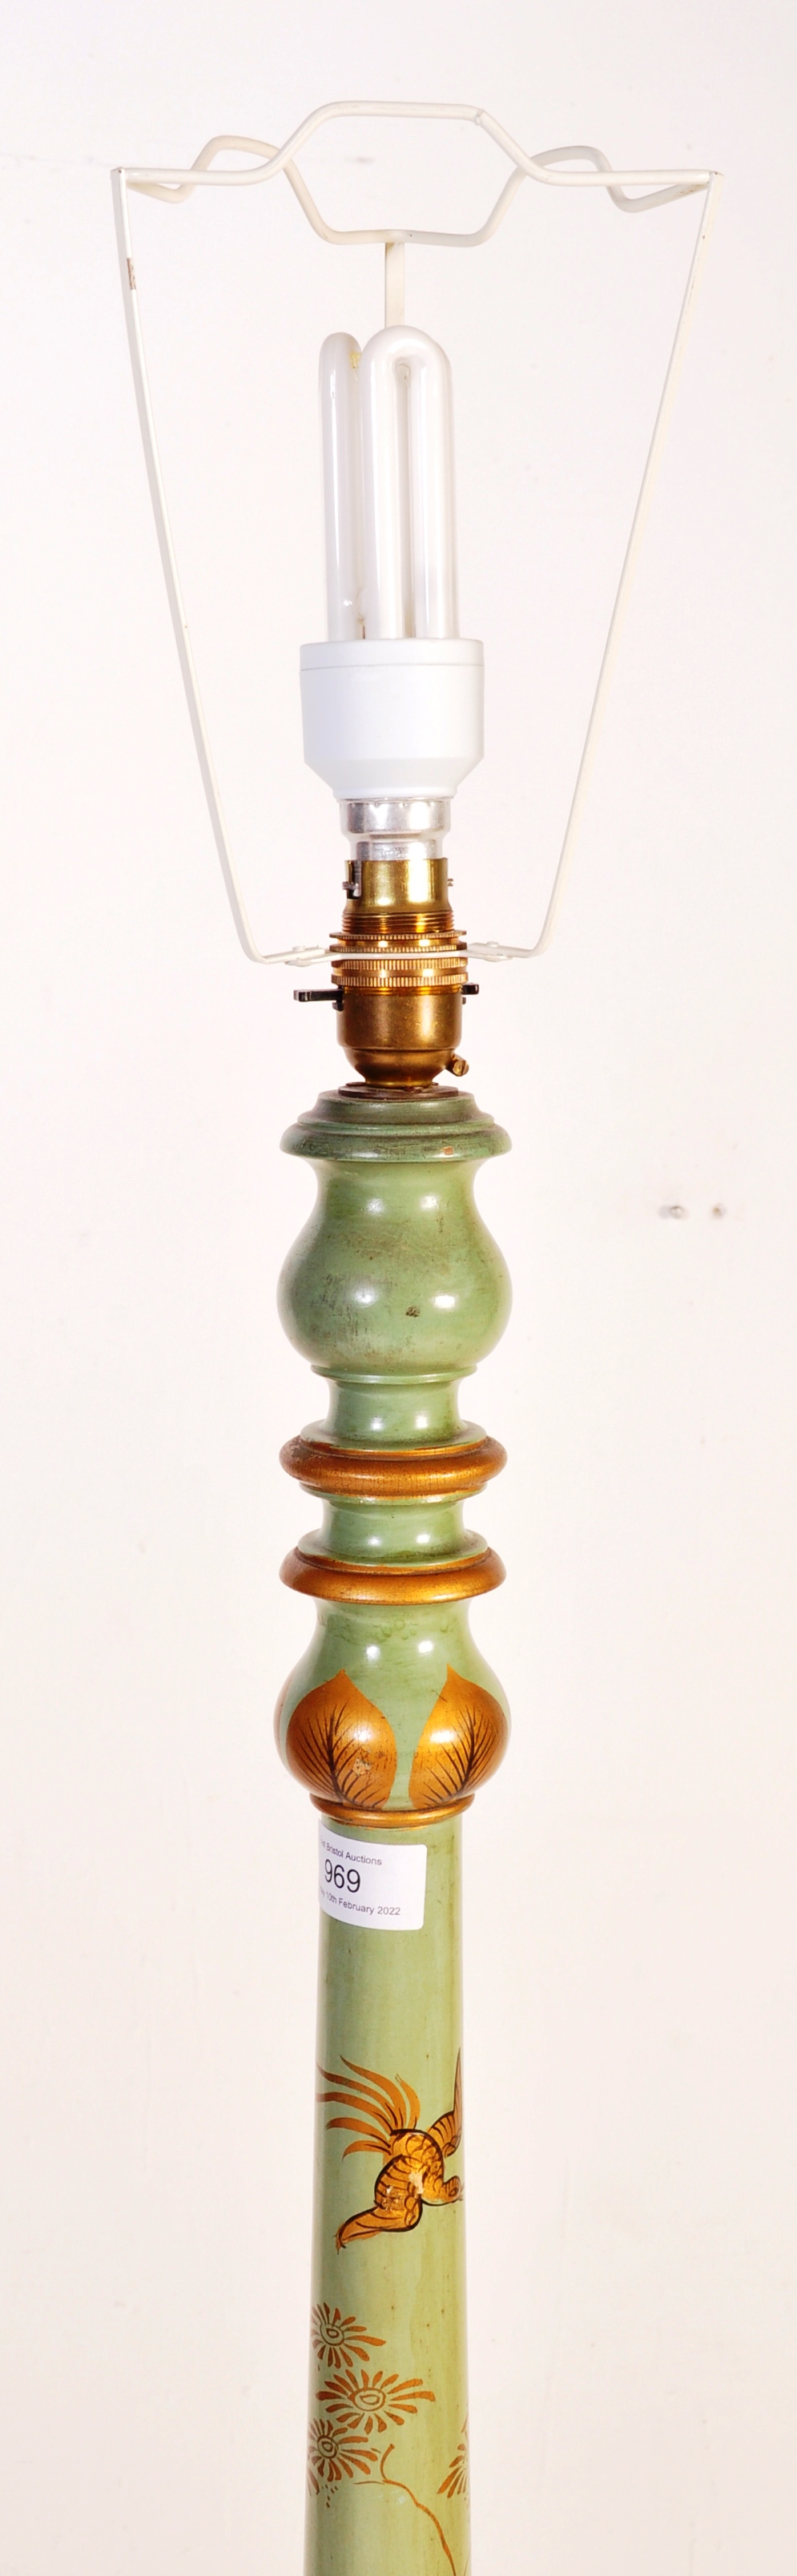 EARLY 20TH CENTURY LIBERTY LONDON TYPE STANDARD LAMP - Image 3 of 9